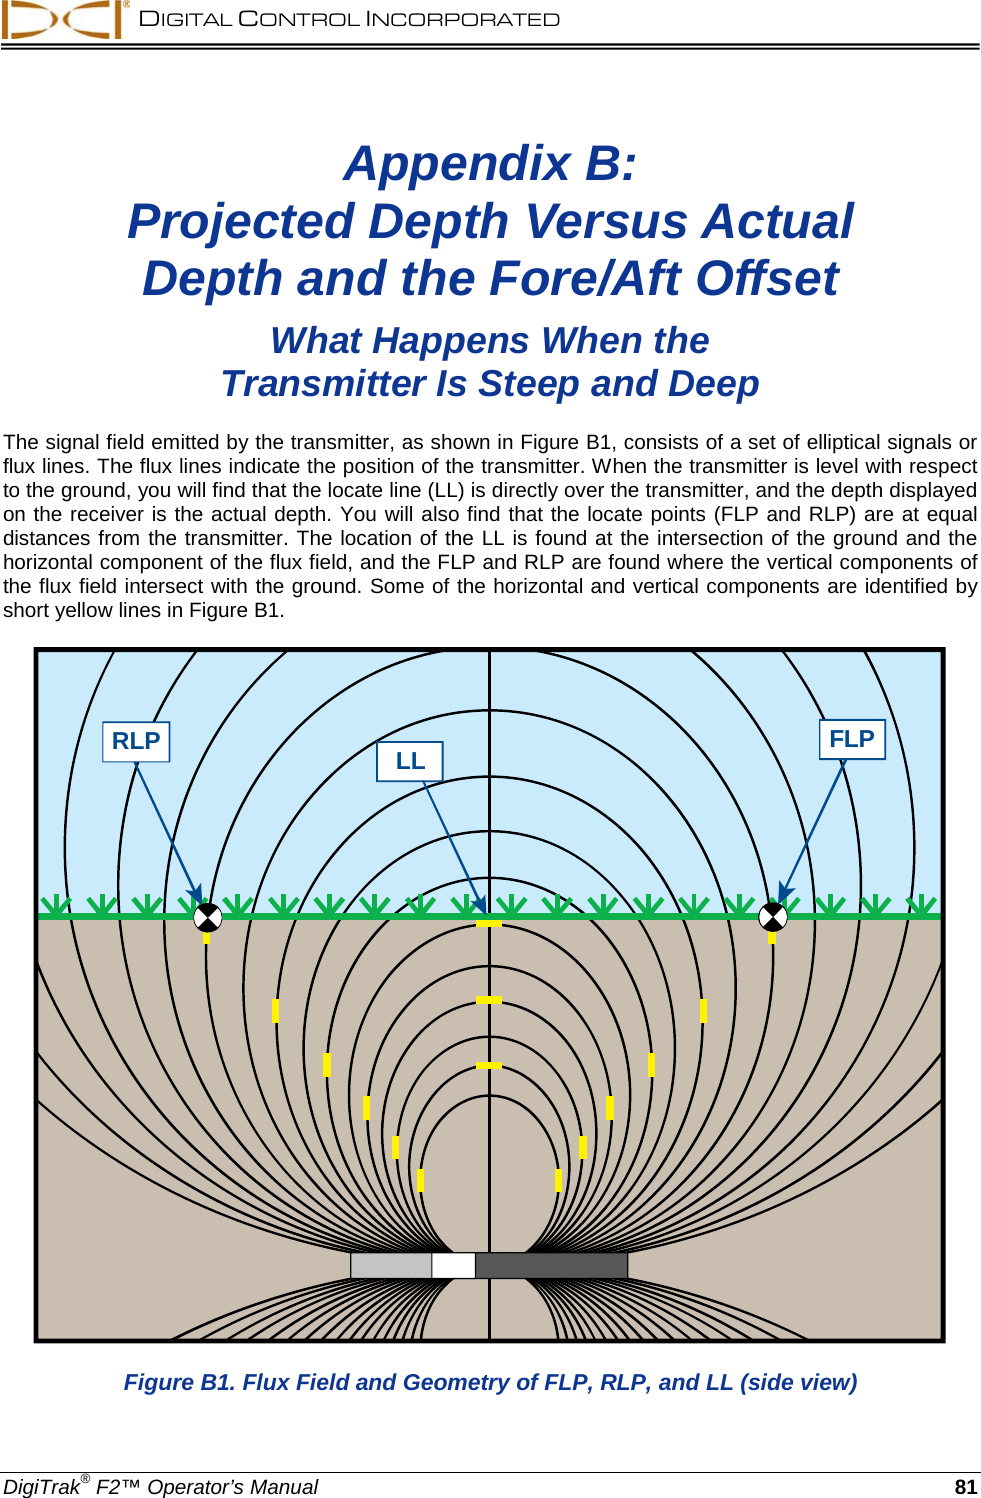  DIGITAL CONTROL INCORPORATED  DigiTrak® F2™ Operator’s Manual 81 Appendix B:  Projected Depth Versus Actual  Depth and the Fore/Aft Offset  What Happens When the  Transmitter Is Steep and Deep The signal field emitted by the transmitter, as shown in Figure B1, consists of a set of elliptical signals or flux lines. The flux lines indicate the position of the transmitter. When the transmitter is level with respect to the ground, you will find that the locate line (LL) is directly over the transmitter, and the depth displayed on the receiver is the actual depth. You will also find that the locate points (FLP and RLP) are at equal distances from the transmitter. The location of the LL is found at the intersection of the ground and the horizontal component of the flux field, and the FLP and RLP are found where the vertical components of the flux field intersect with the ground. Some of the horizontal and vertical components are identified by short yellow lines in Figure B1. RLP FLPLL Figure B1. Flux Field and Geometry of FLP, RLP, and LL (side view) 